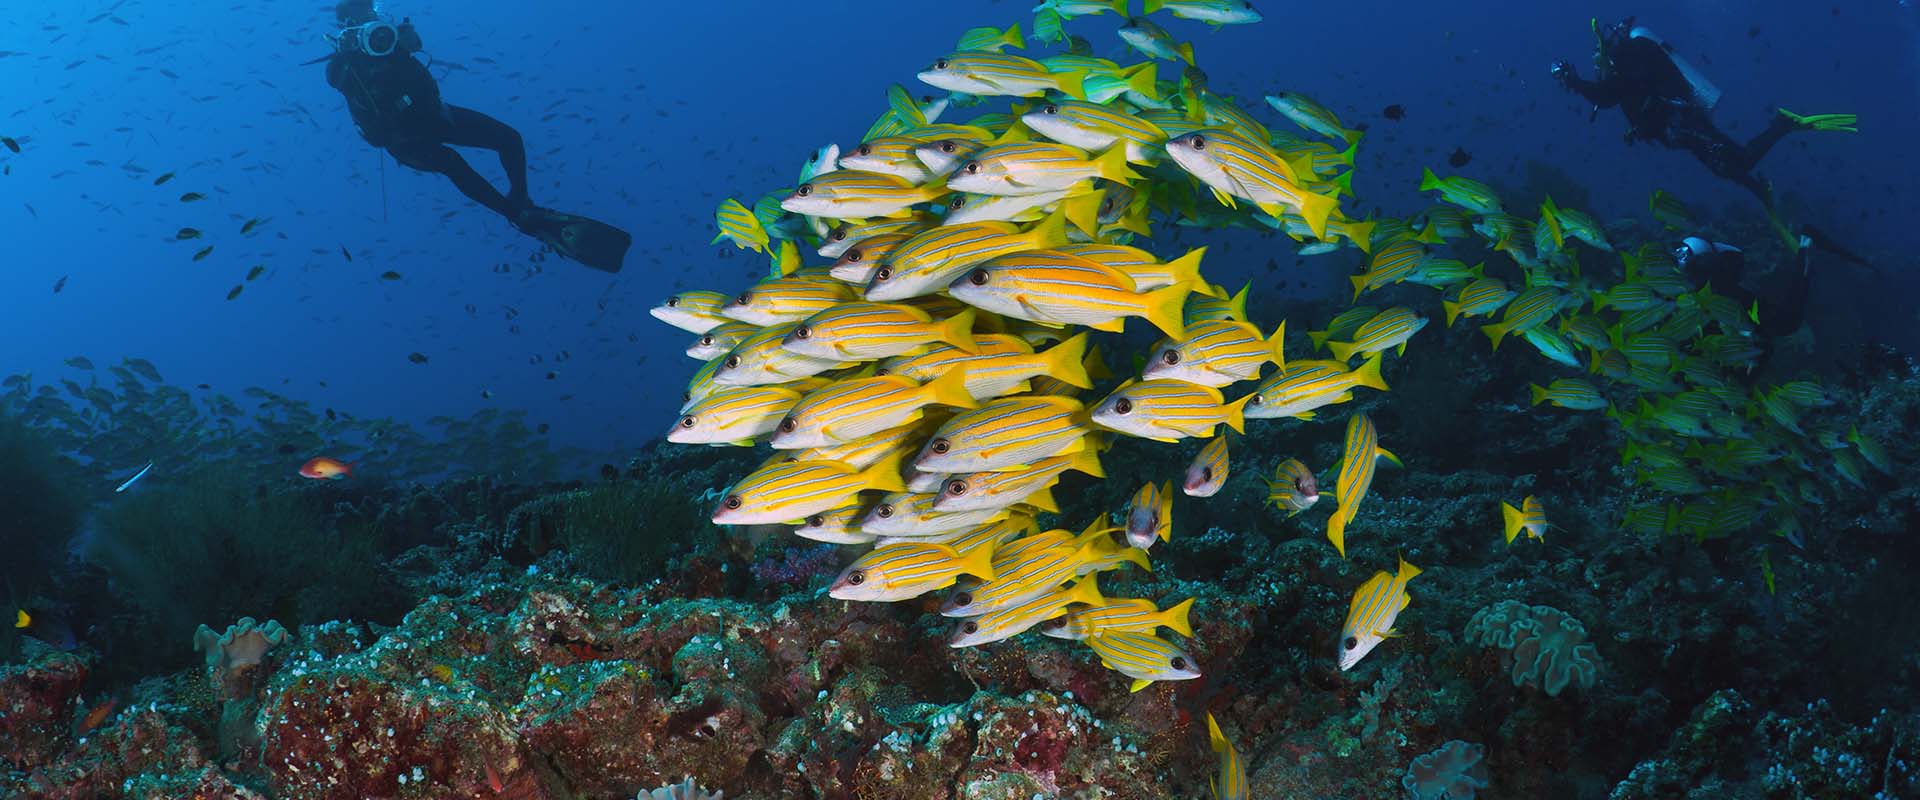 South Male Atoll Liveaboard Diving